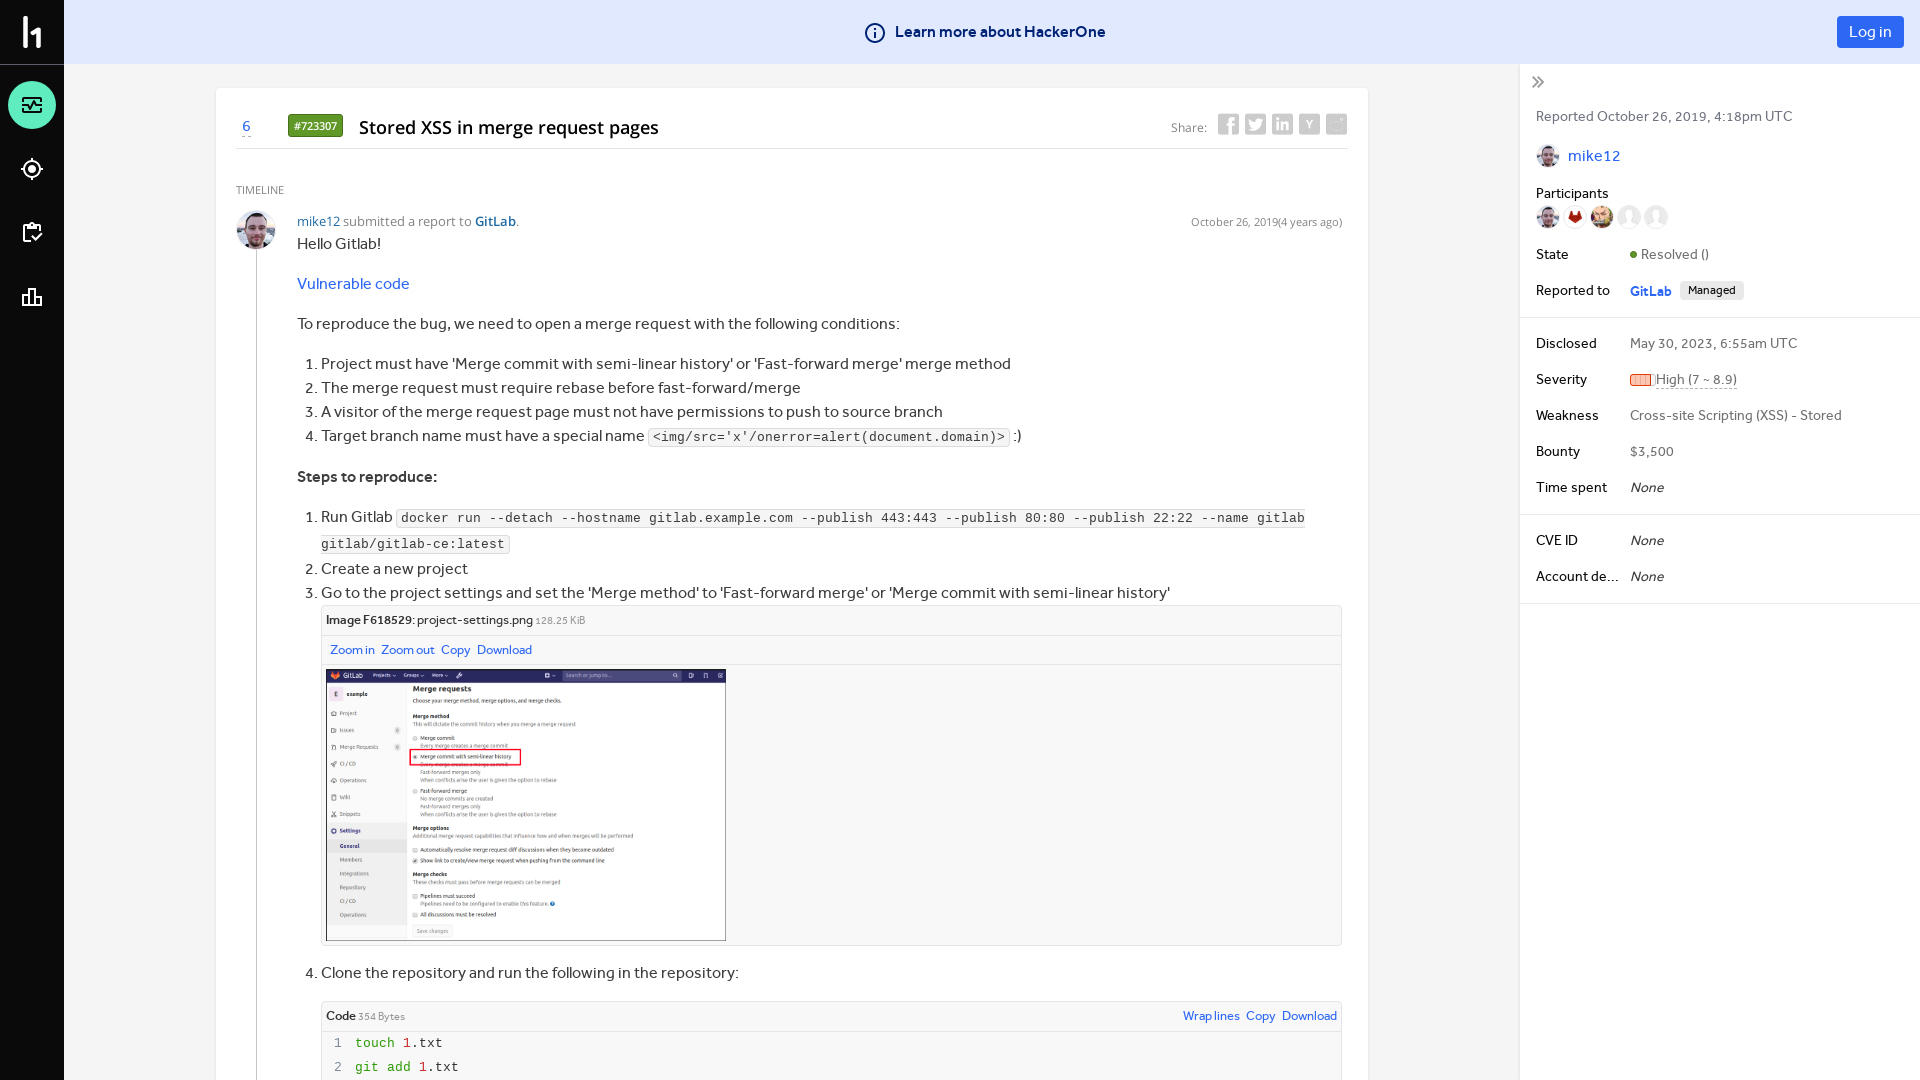 GitLab | Report #723307 - Stored XSS in merge request pages | HackerOne